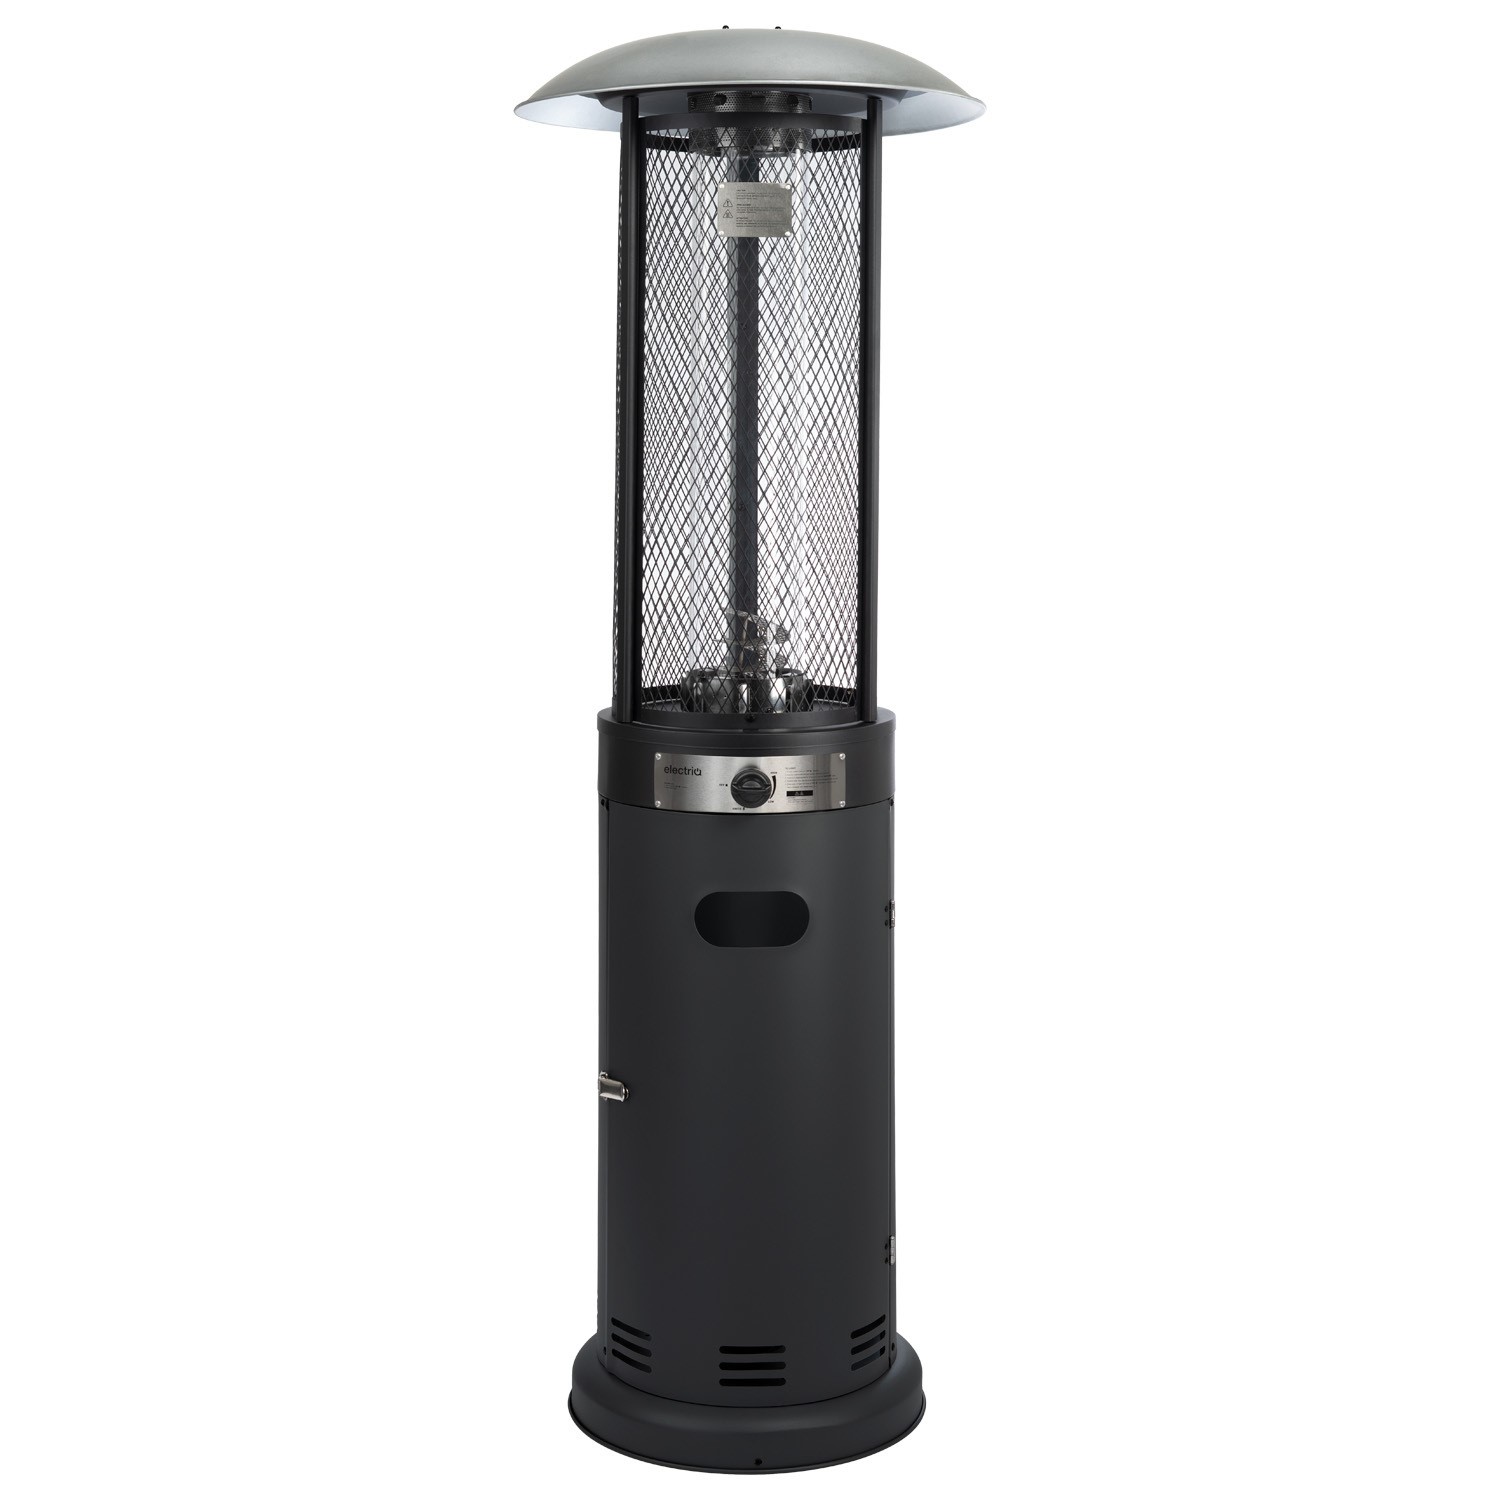 Outdoor Freestanding Gas Patio Heater In Black with Free Cover